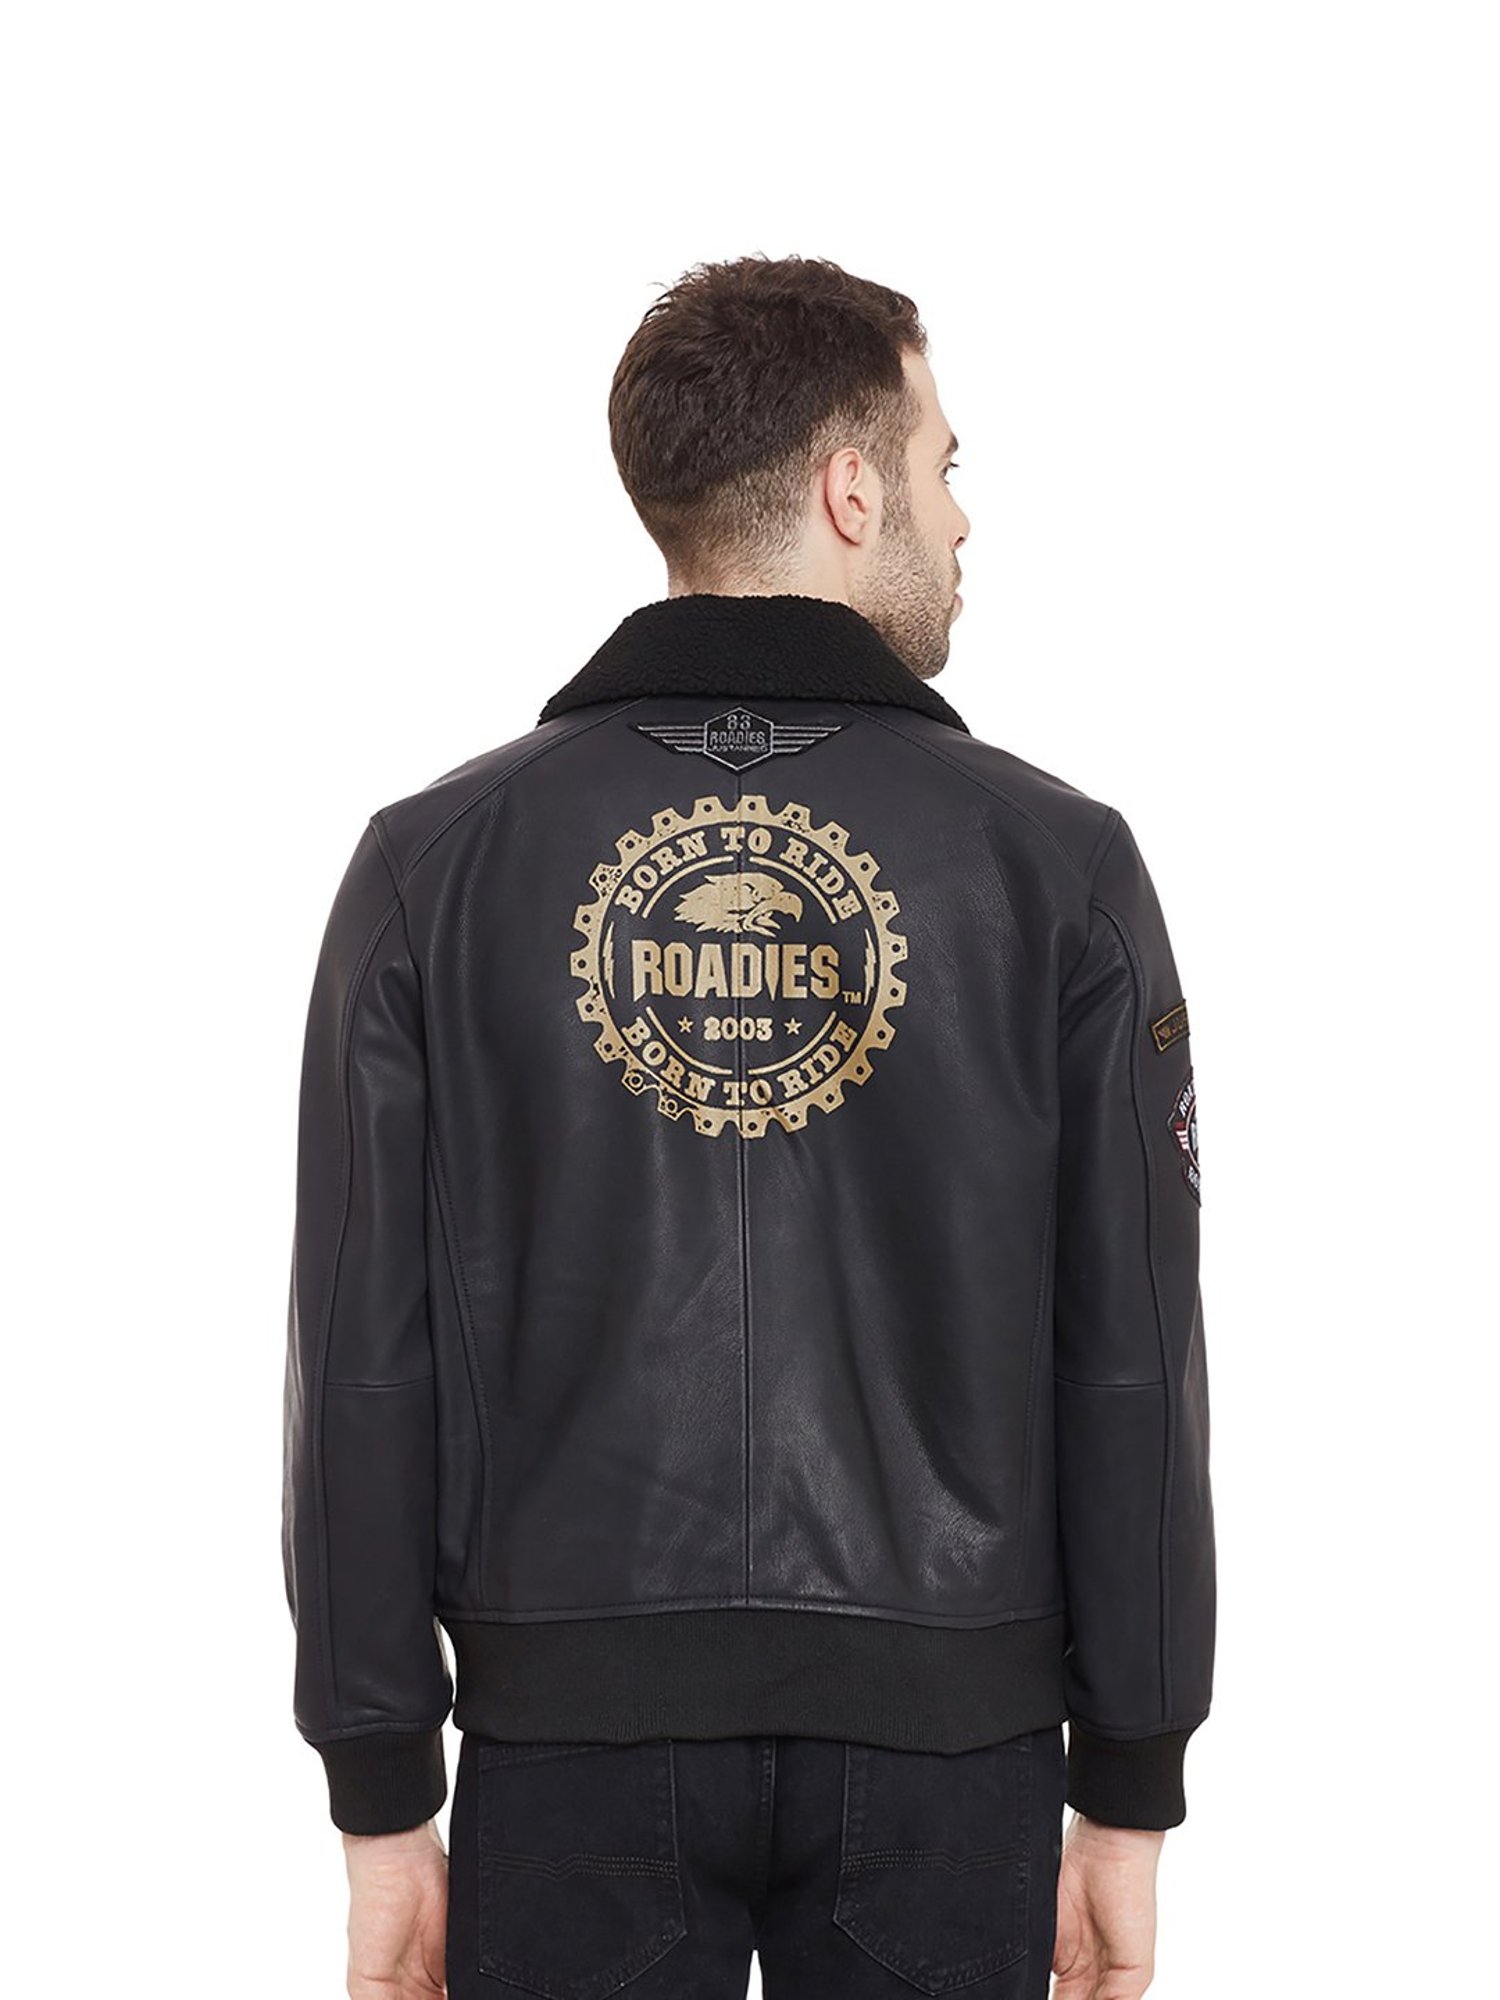 MTV India - Let your Jacket speak for you, get trendy with Roadies Leather  Jackets #BeTheTribe add them to your wardrobe now:  http://bit.ly/RoadiesLeatherJacketsJustanned #RoadiesJackets  #rannvijaysingha #Roadies #LeatherJackets #TrendyJackets #Tribe ...